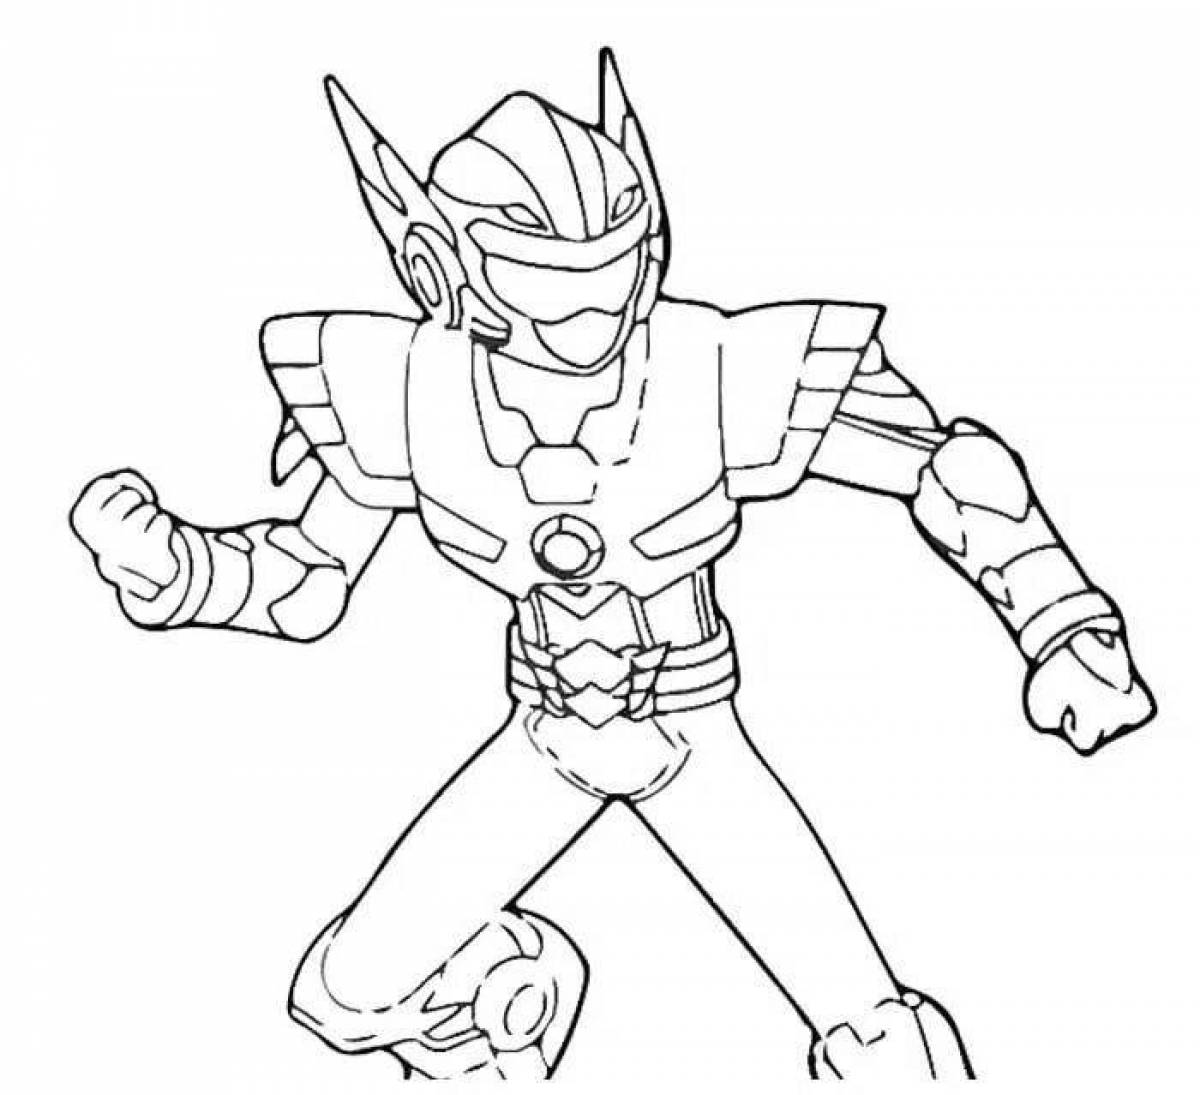 Fantastic mini force coloring page